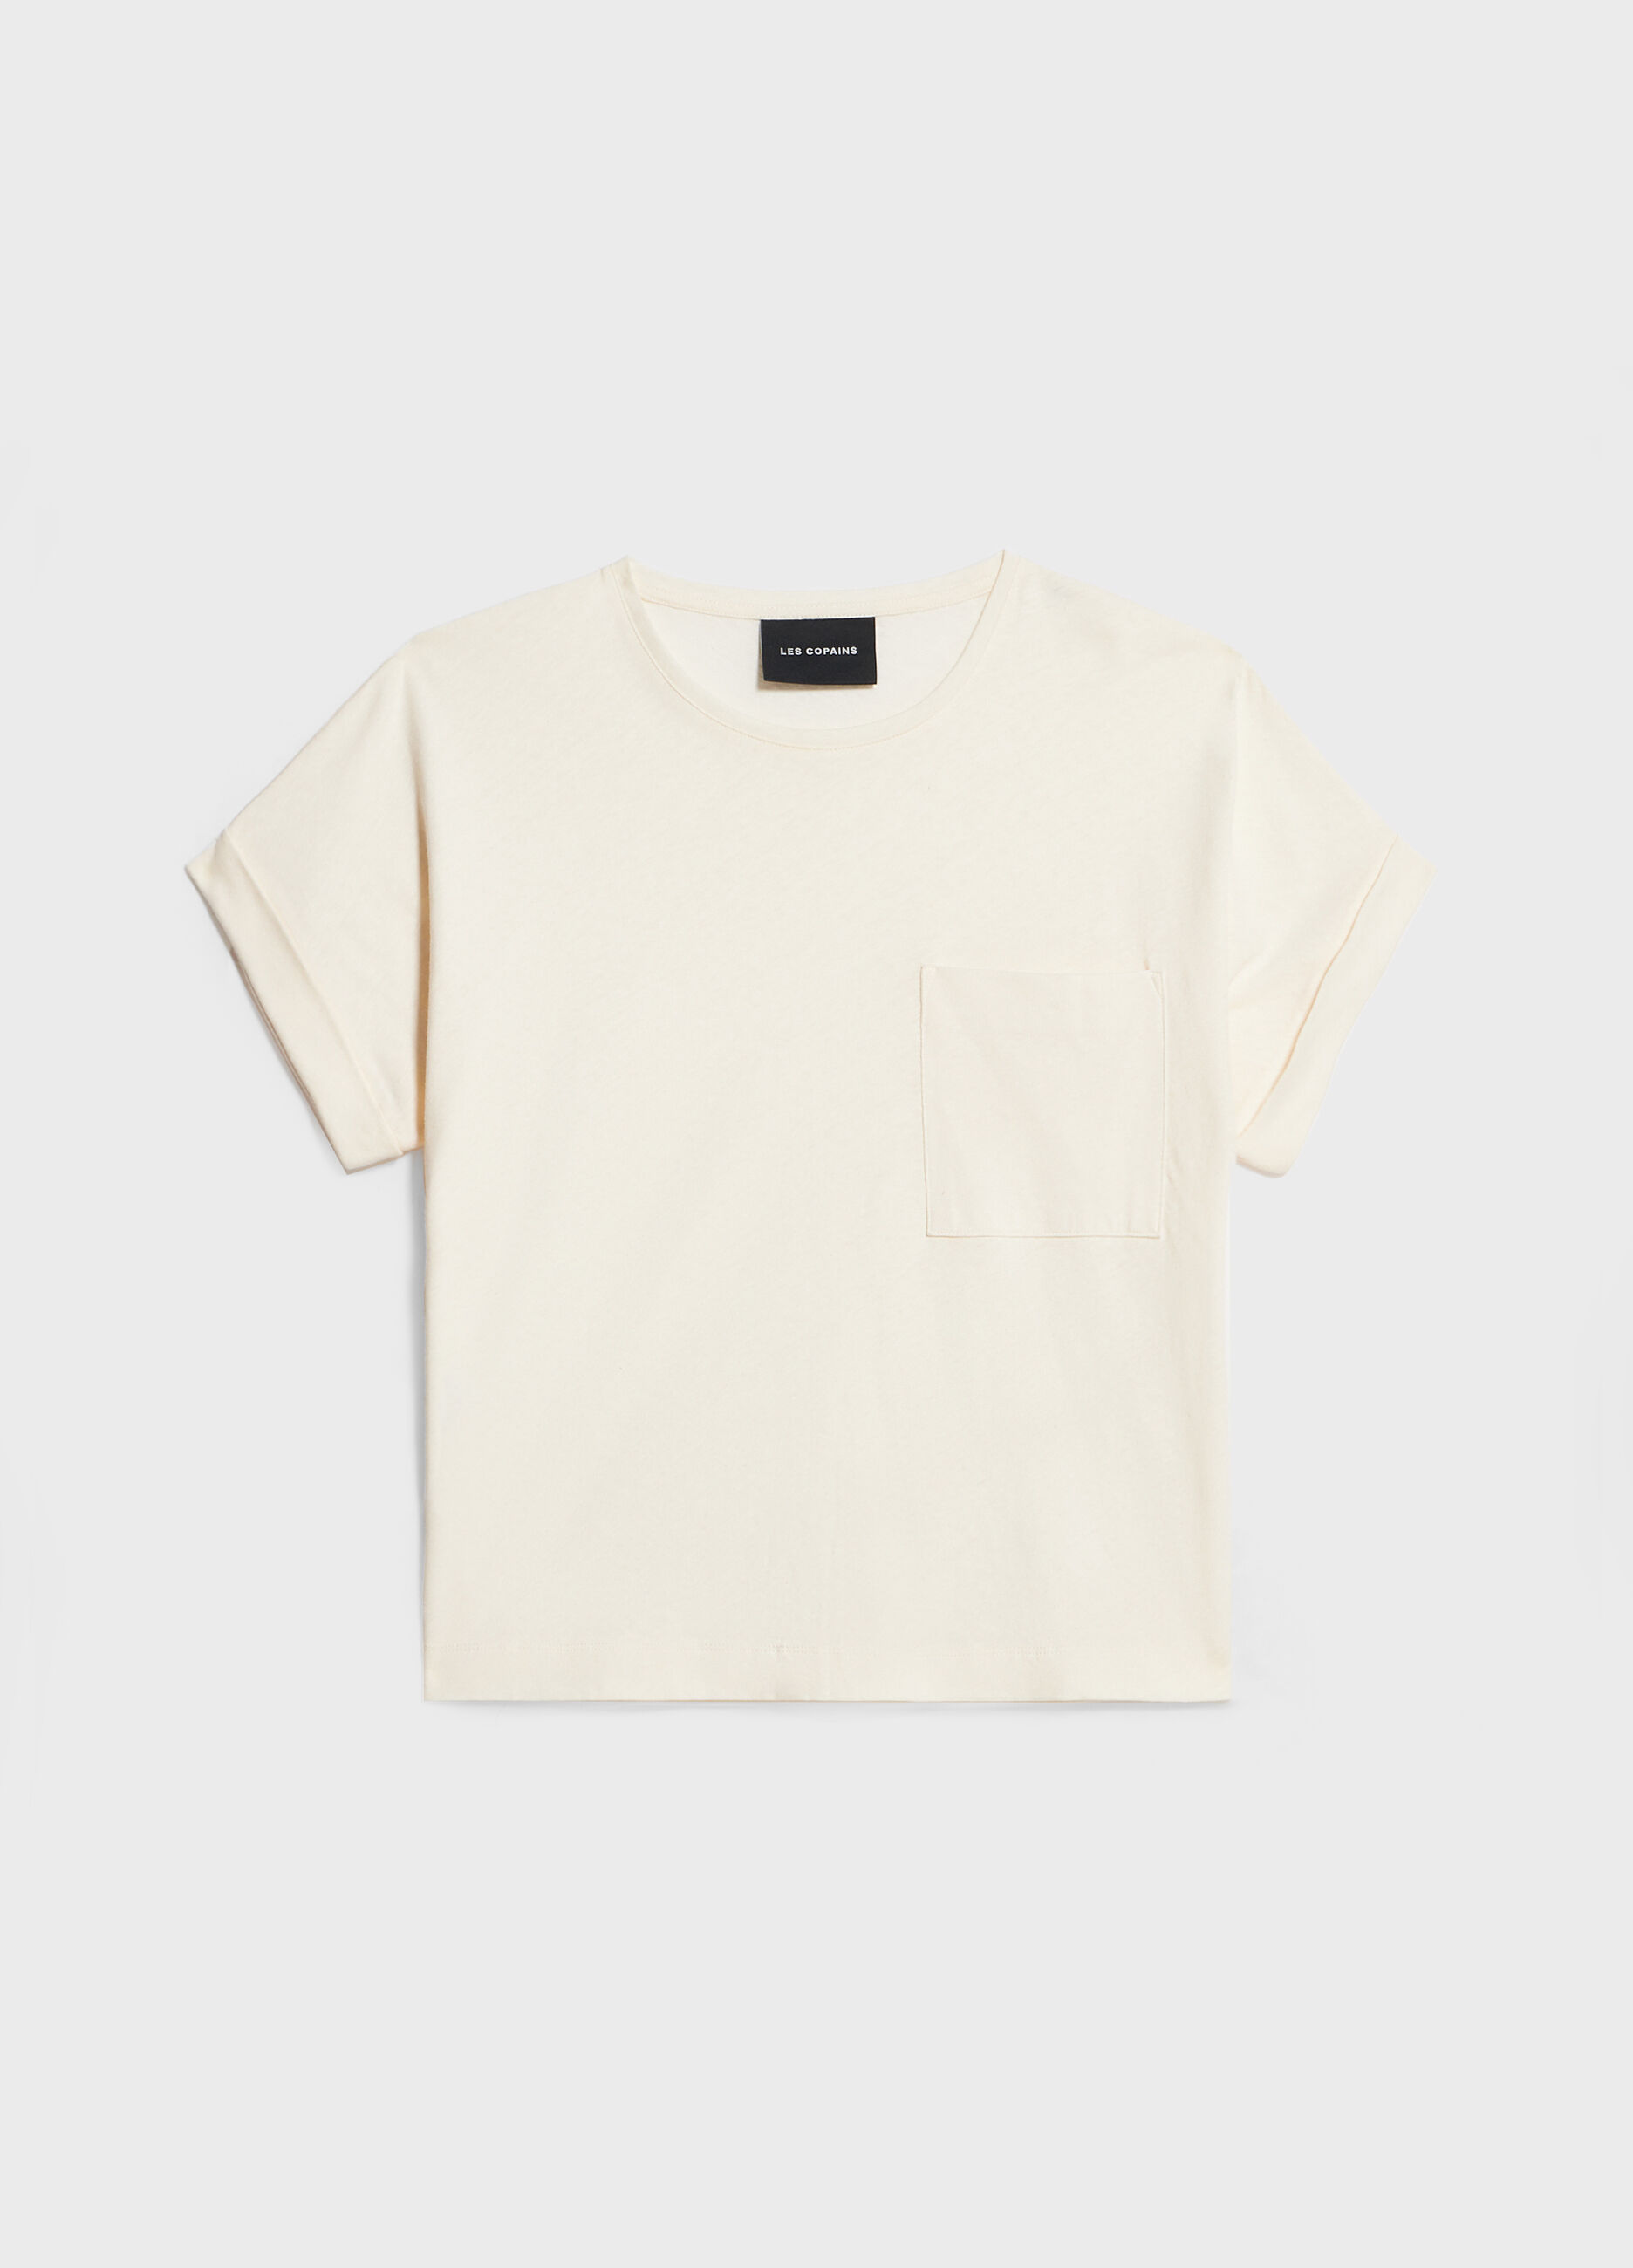 T-shirt in linen and cotton_4